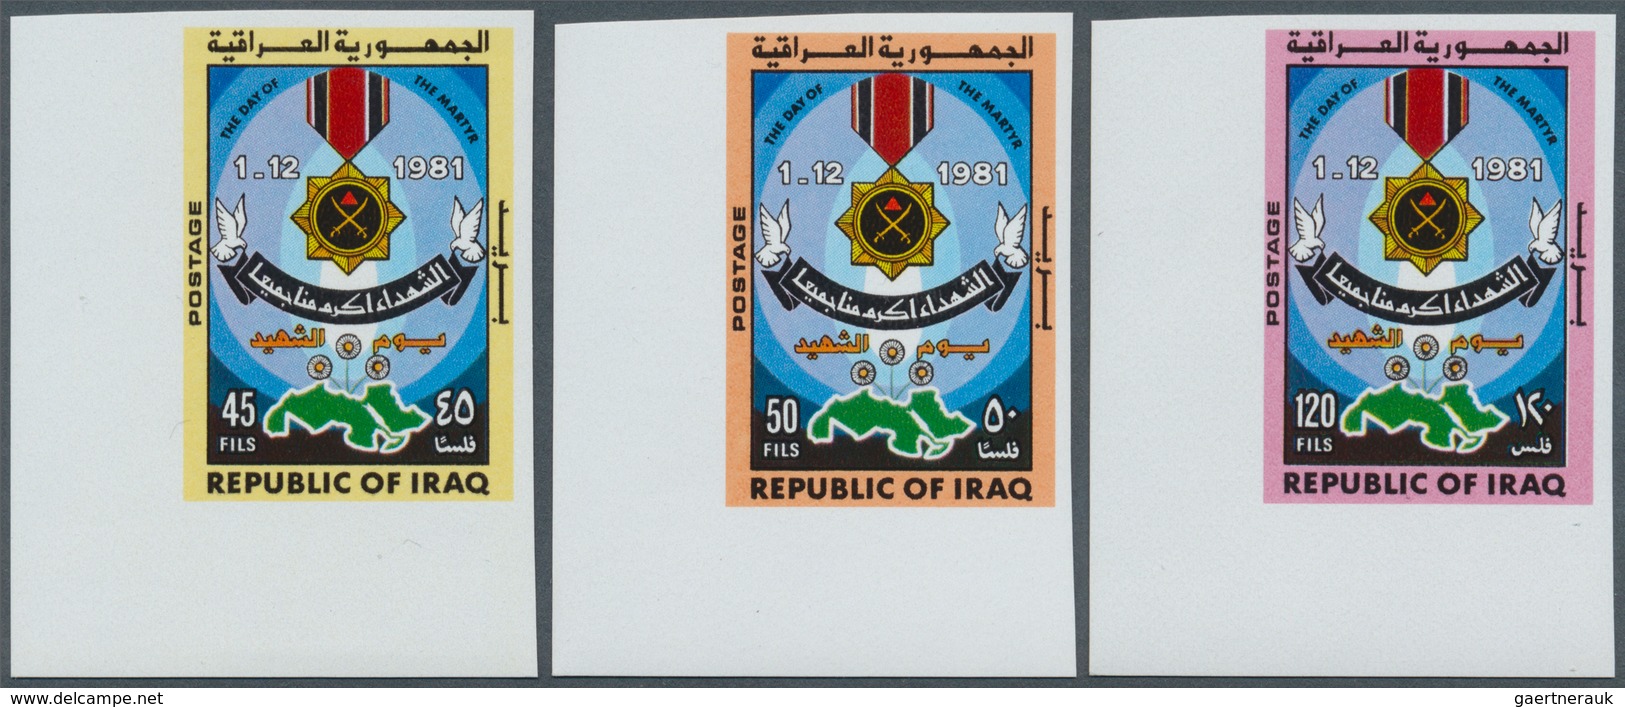 Irak: 1981, Lot Of 2 Complete IMPERFORATED Sets "Martyrs' Day": The First Set Containing The Postage - Irak